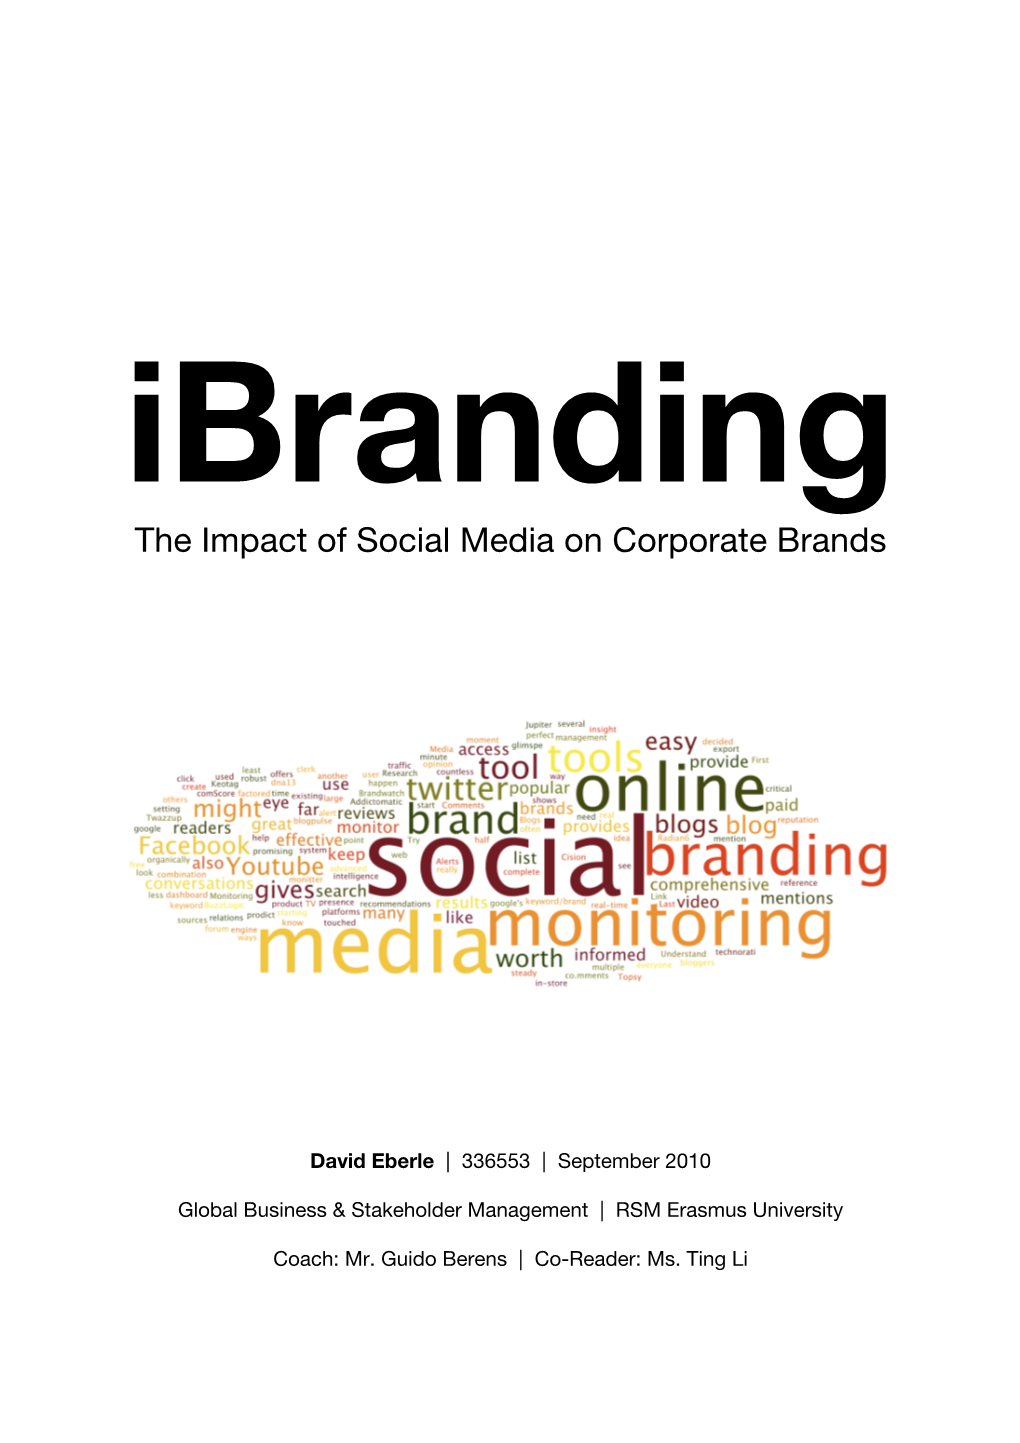 The Impact of Social Media on Corporate Brands